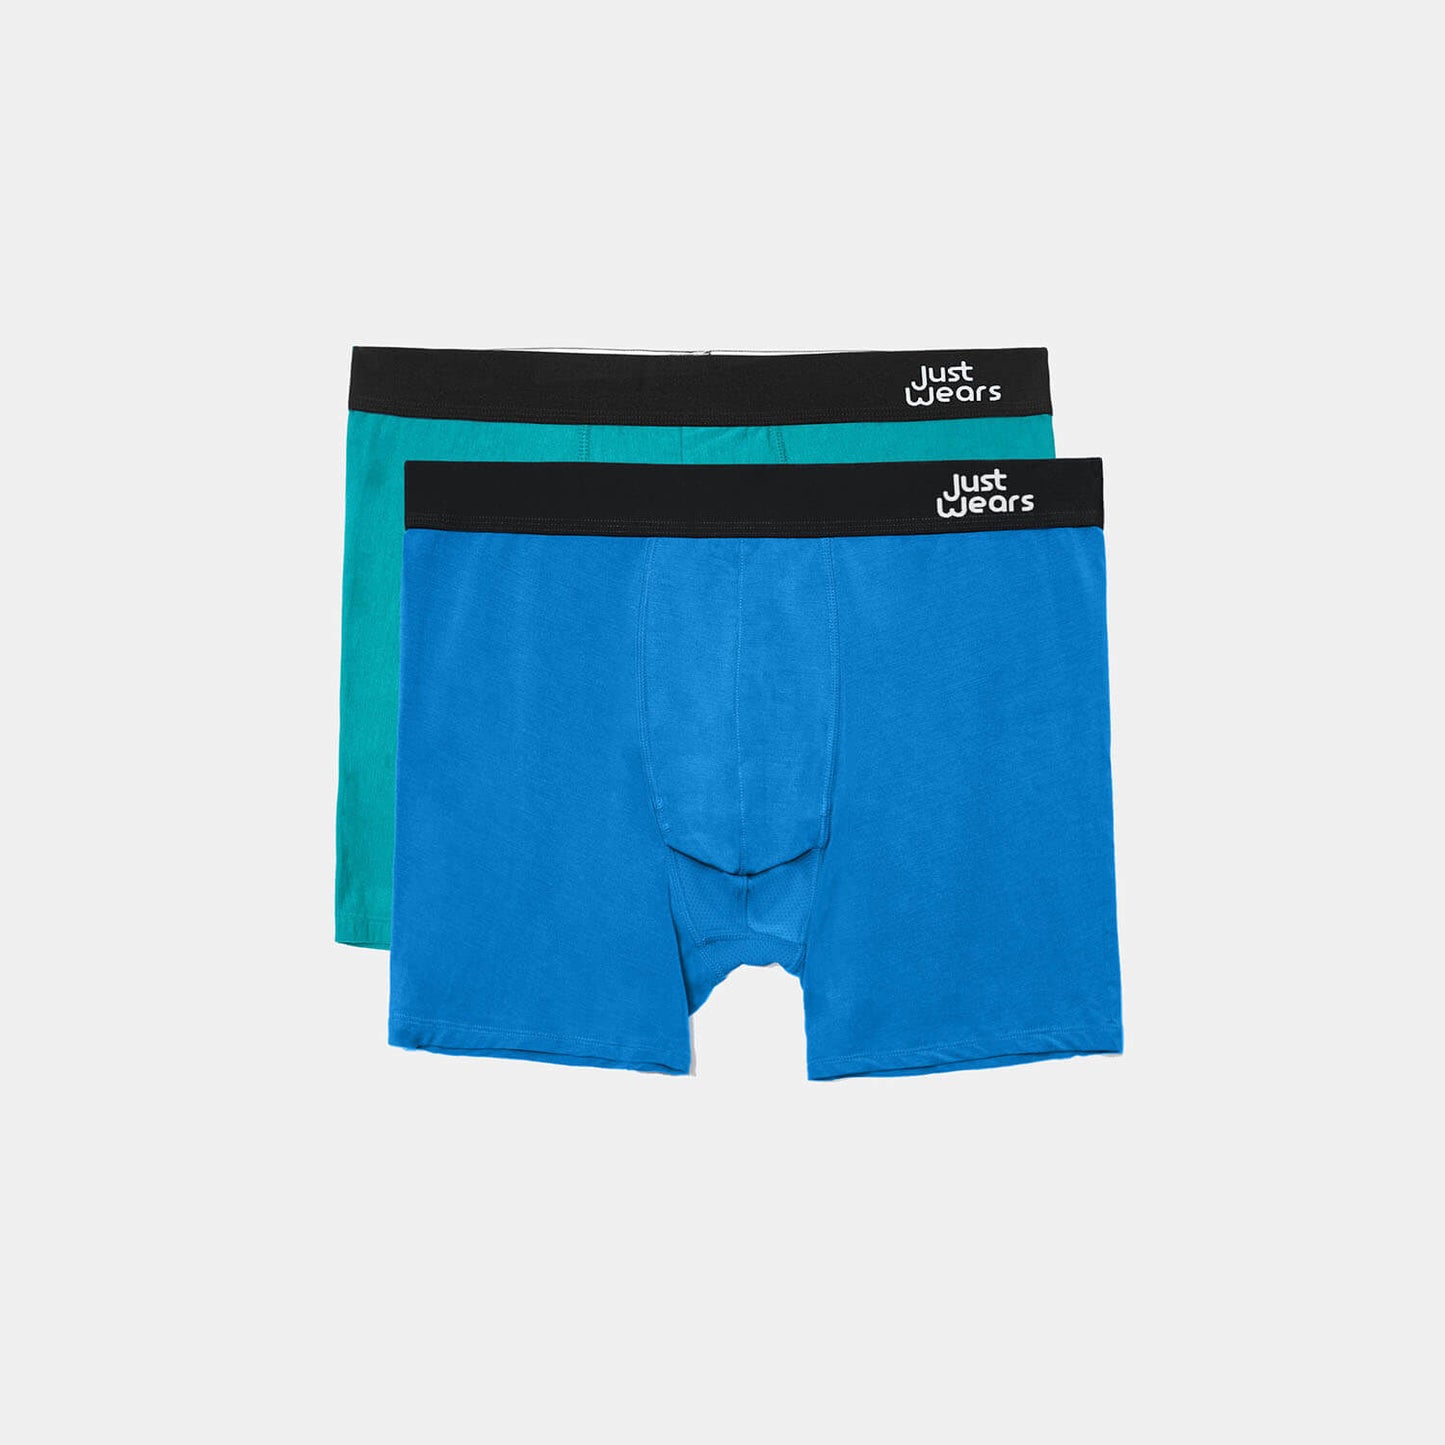 Boxer Briefs Duo Pack (color - Blue & Green)